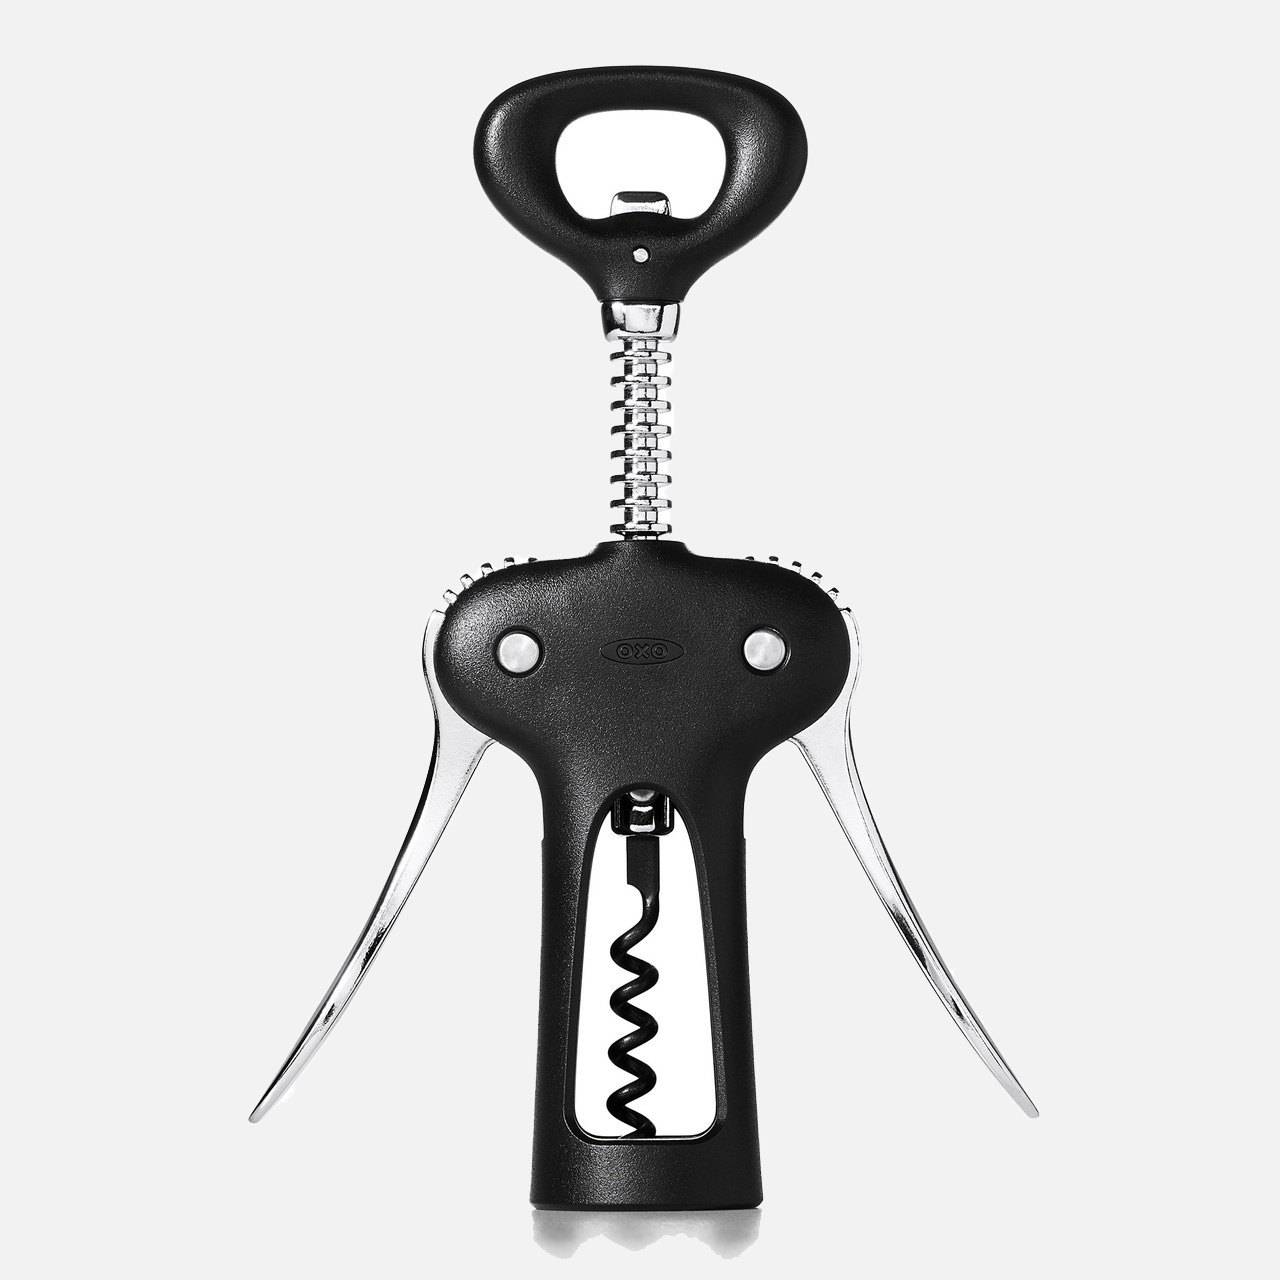 Winged corkscrew with bottle opener